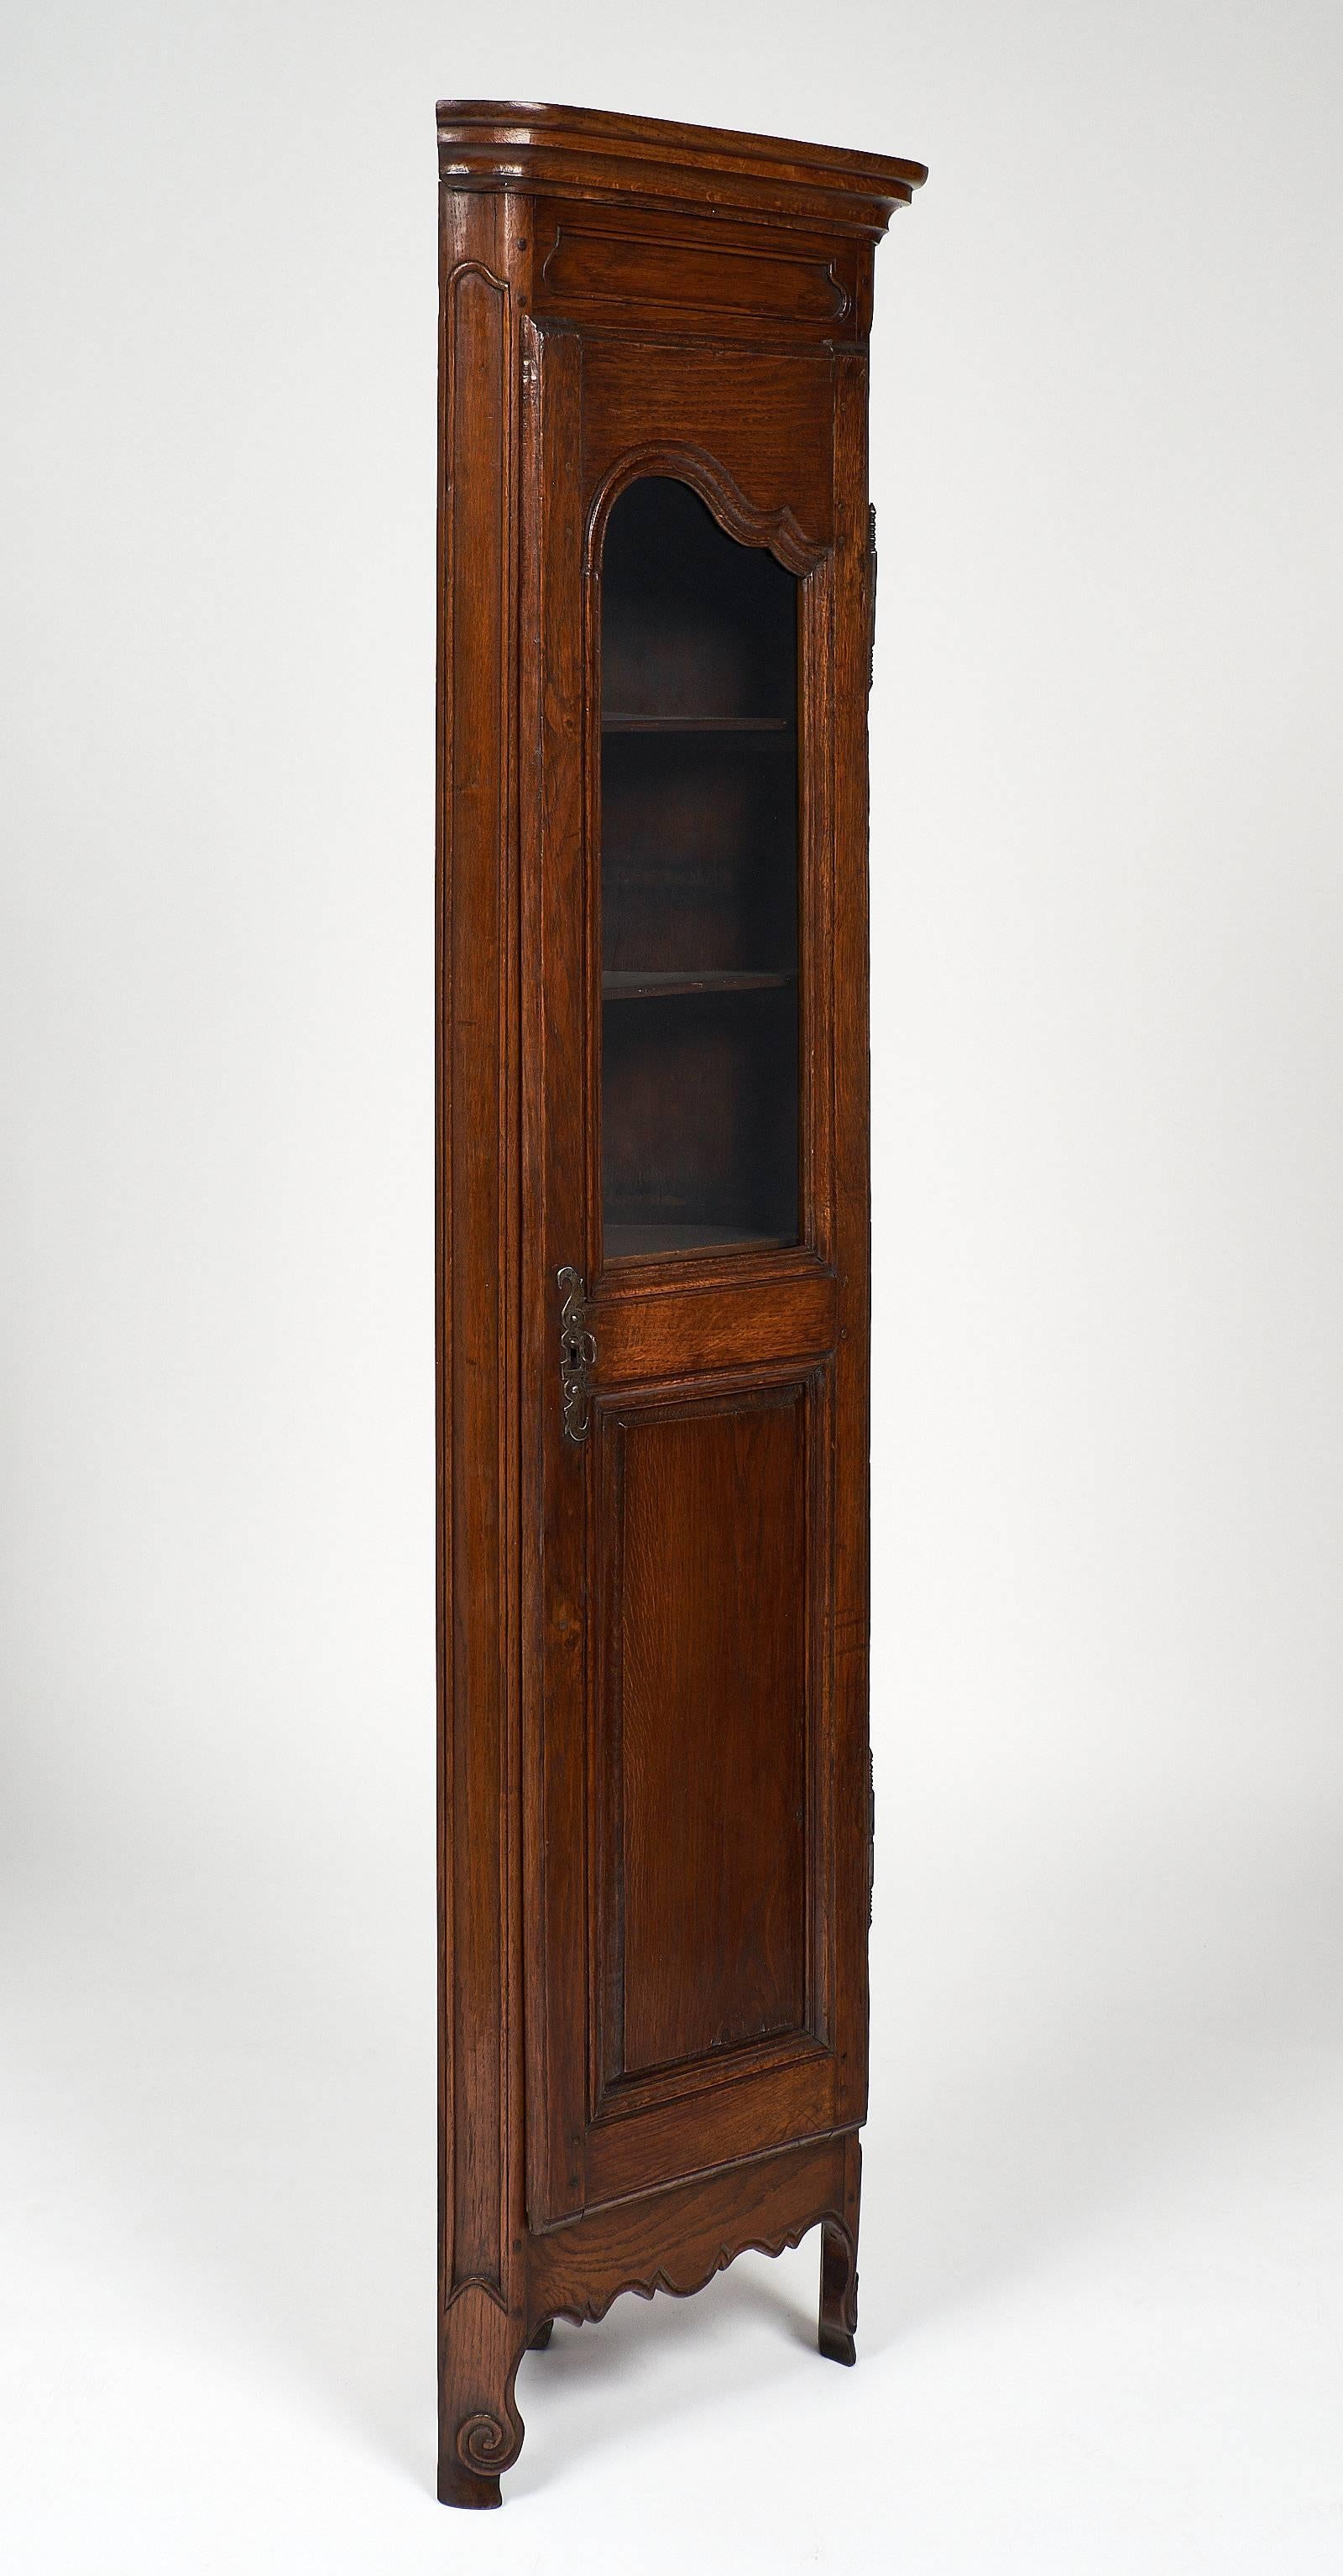 A rare Louis XV style 18th century corner cabinet with a single glass door. The oak wood is hand-carved and patinated, featuring cabriole legs with a scalloped apron. The lock and key are in working condition.